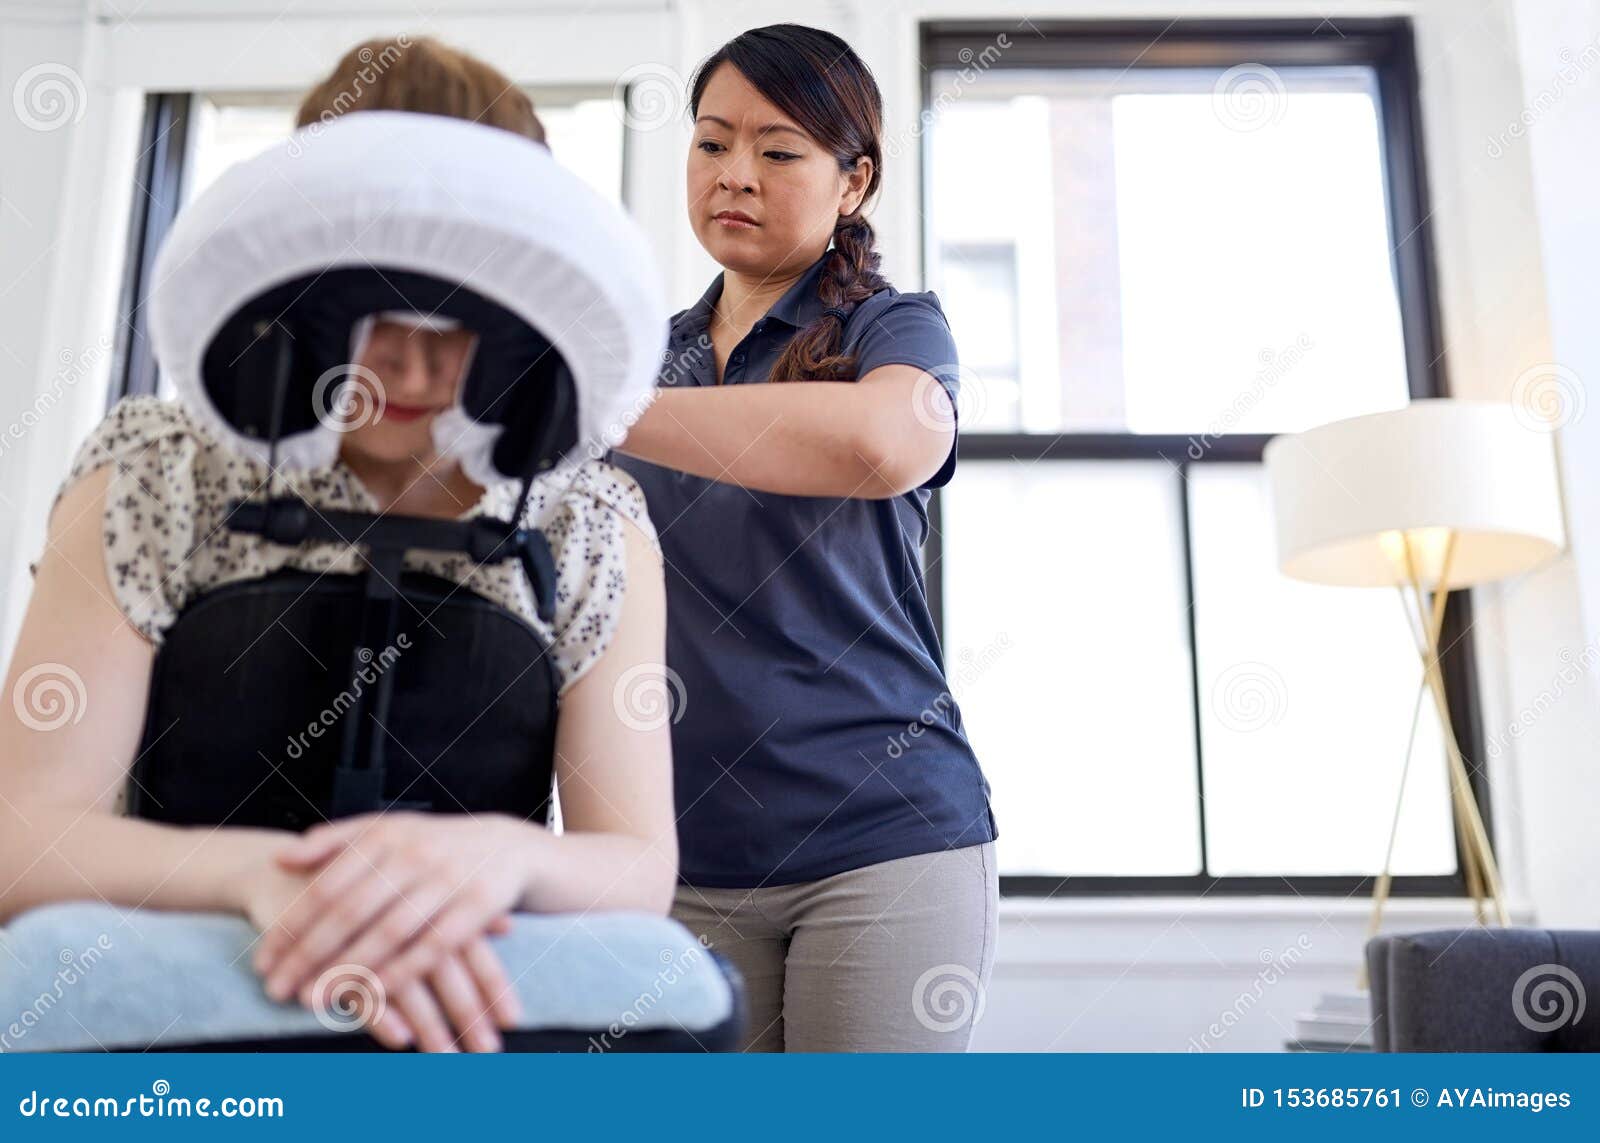 Chinese Woman Massage Therapist Giving A Neck And Back Pressure